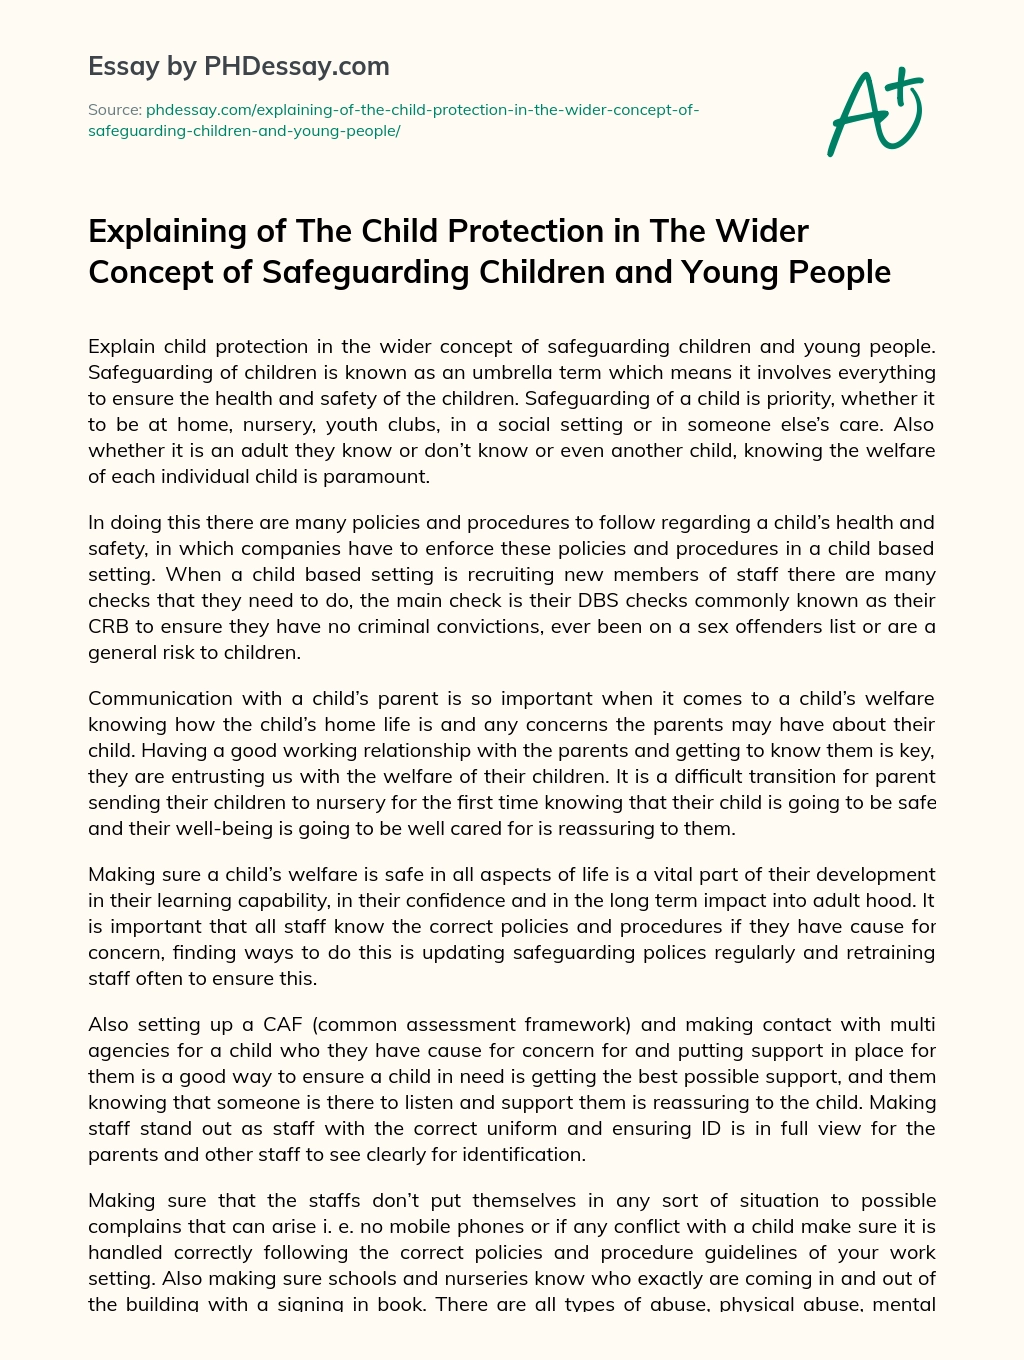 Explaining of The Child Protection in The Wider Concept of Safeguarding Children and Young People essay